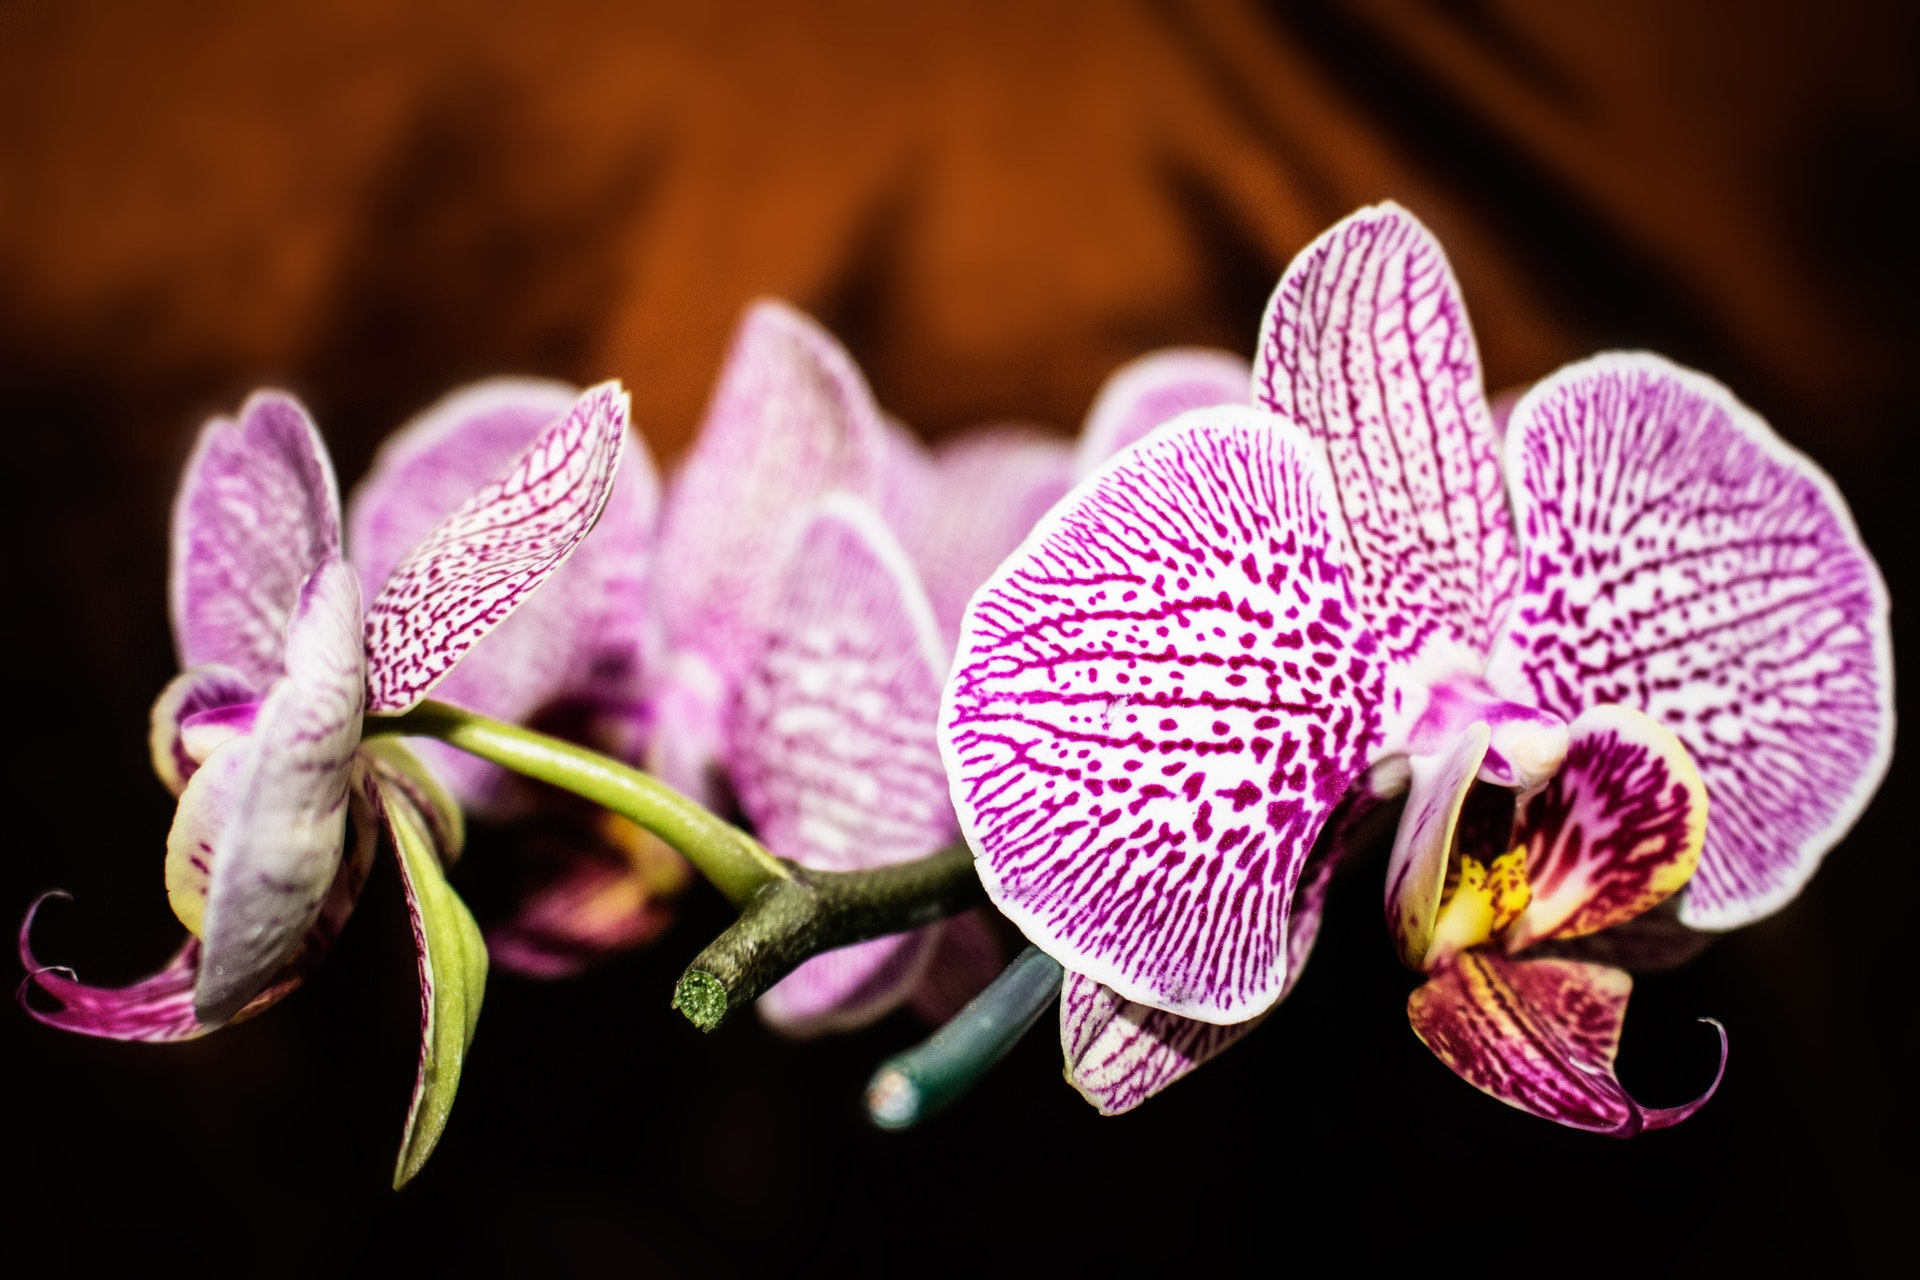 https://0201.nccdn.net/1_2/000/000/13a/1a8/purple-and-white-moth-orchid-flowers-in-selective-focus-1621168-1920x1280.jpg